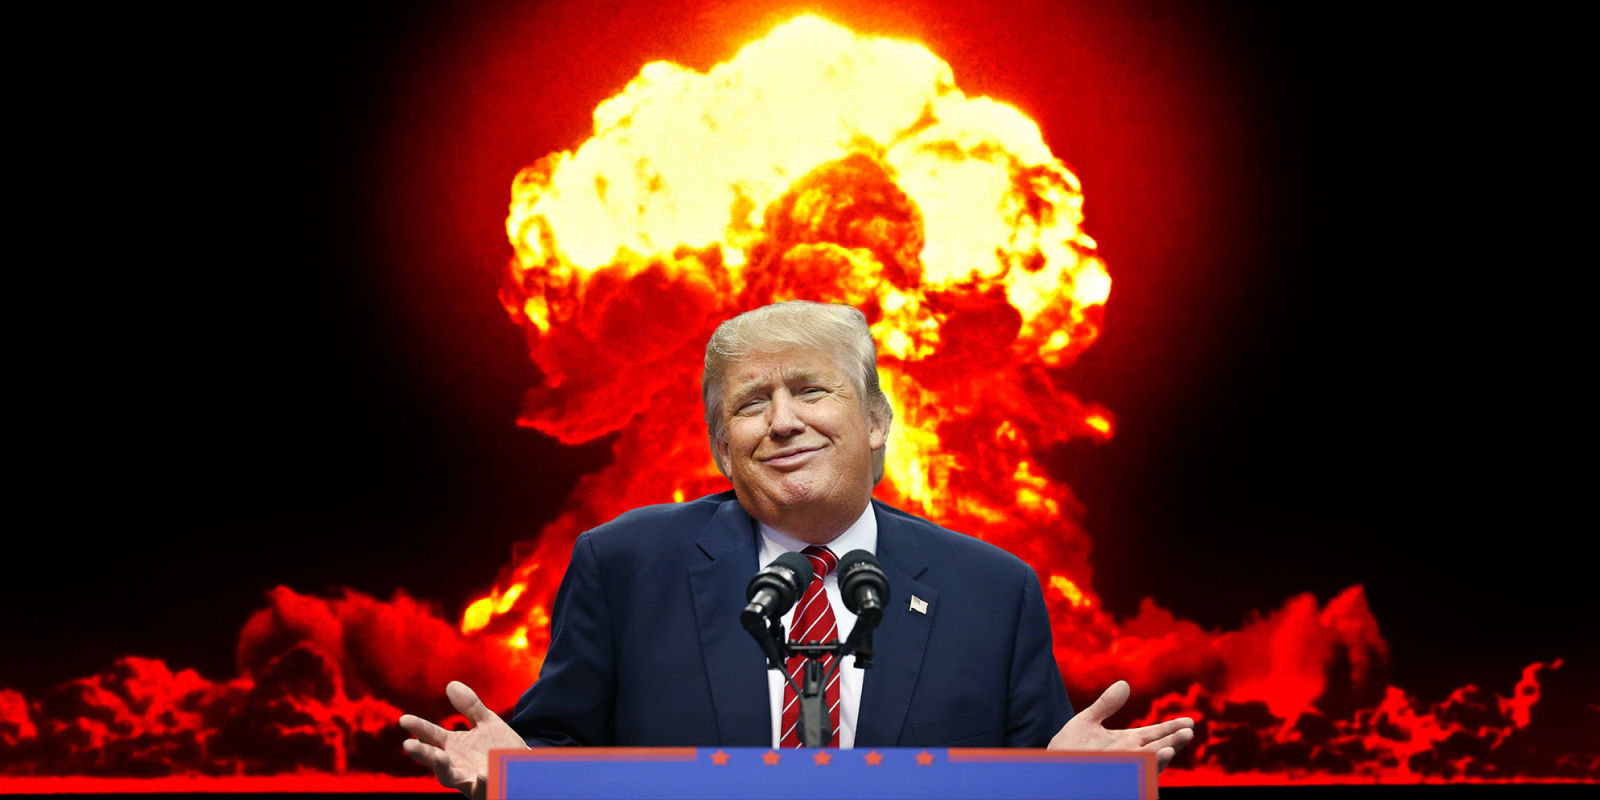 Trump with nuclear explosion graphic